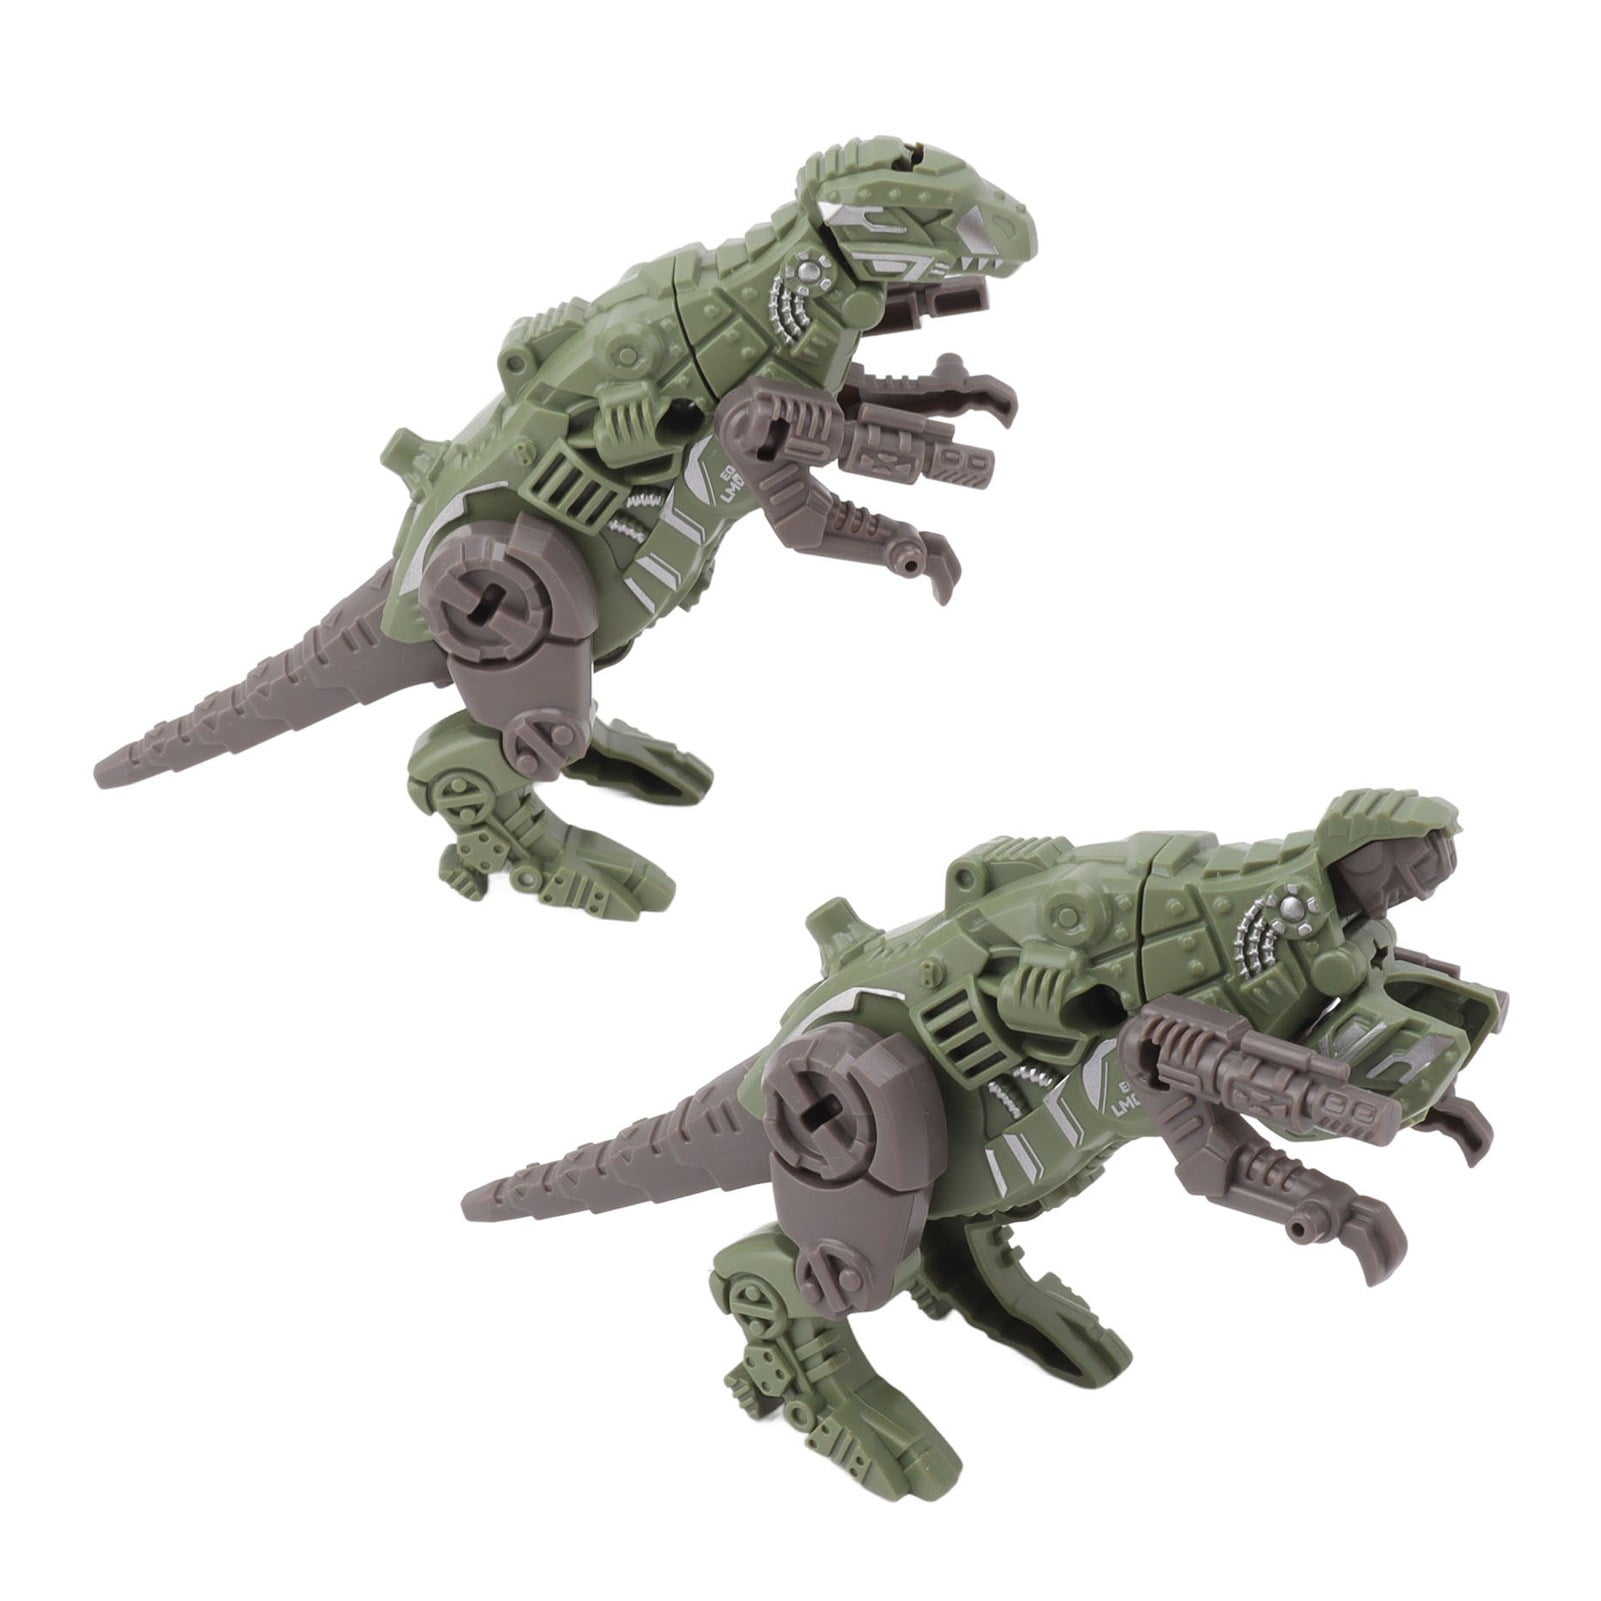 Quick reminder that Jolt's whips fit nicely as the grappling hooks for  Dino. : r/transformers